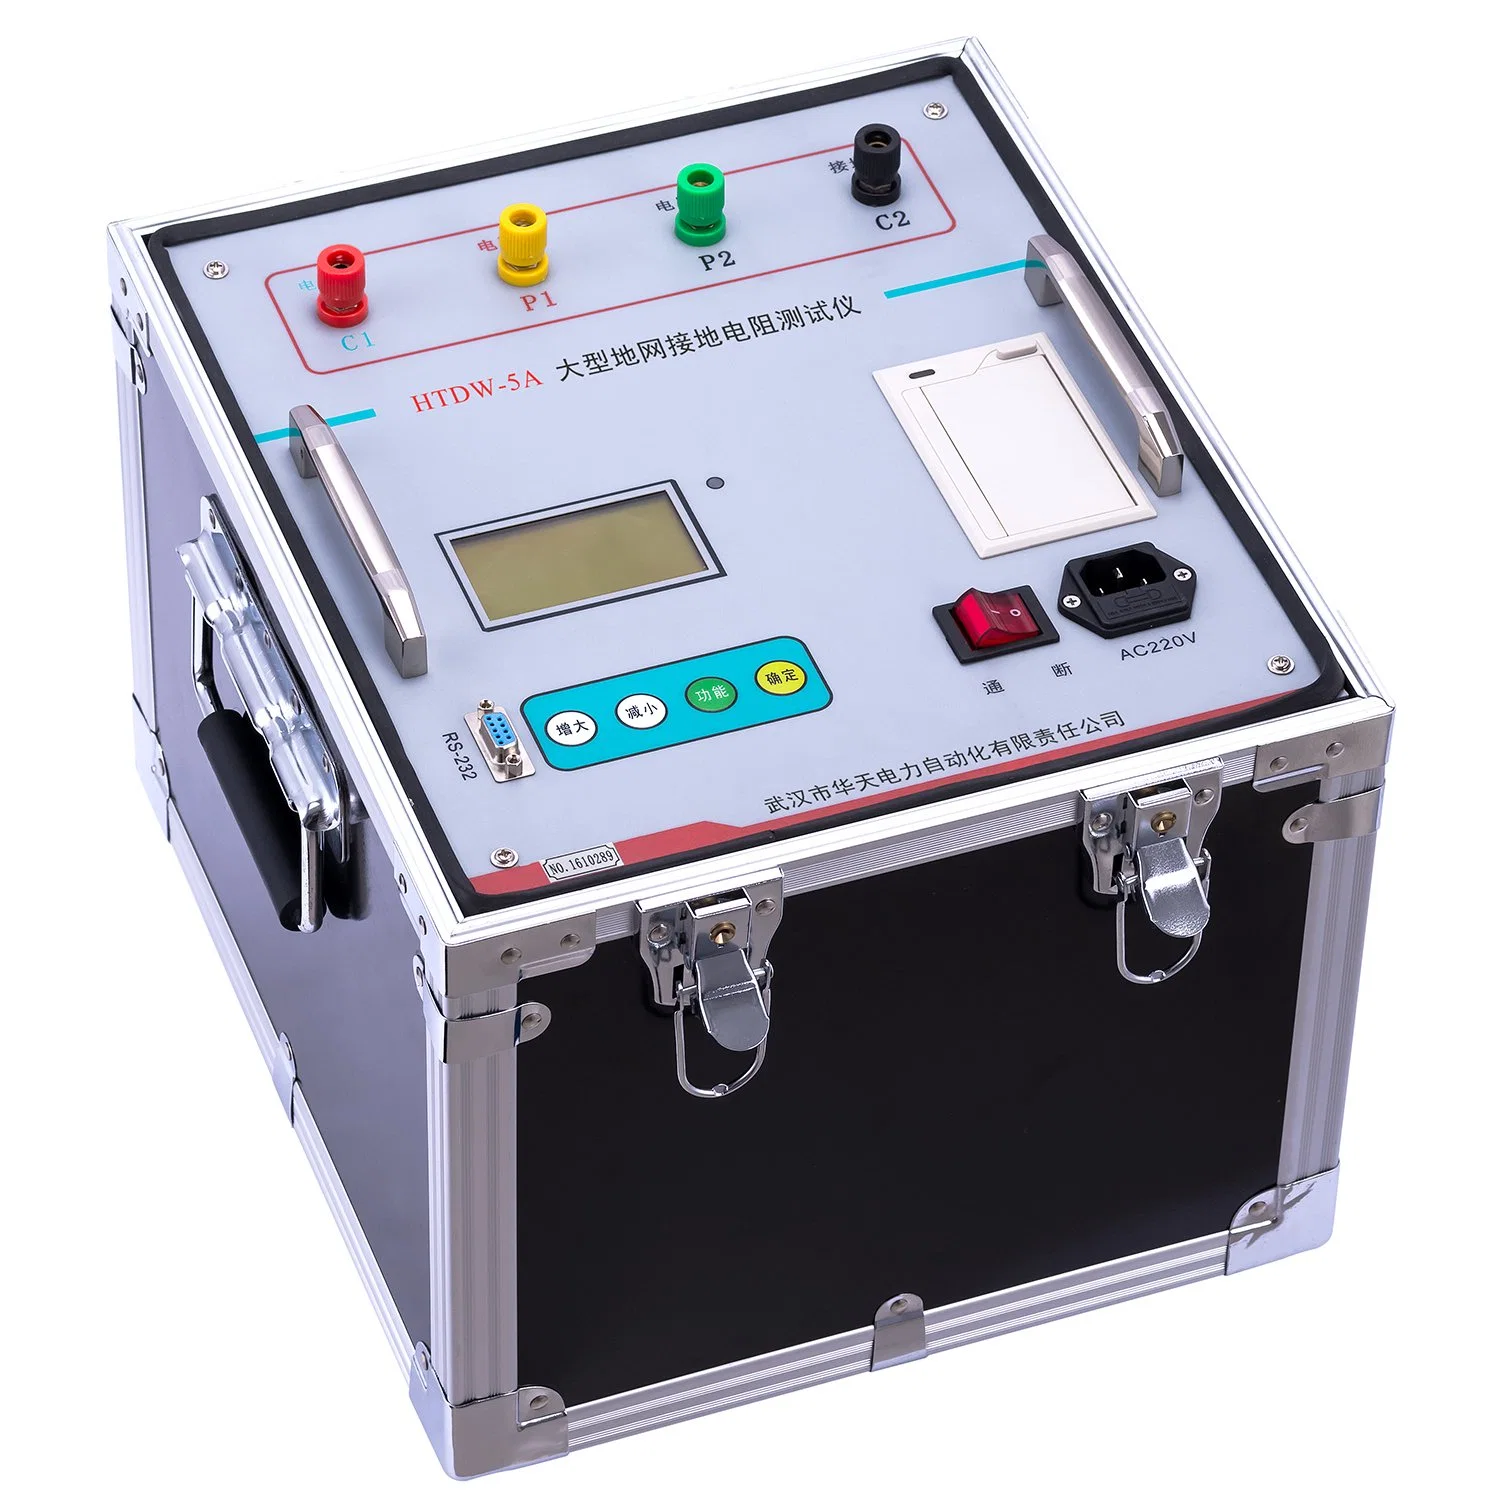 Htdw-5A AC 400V 5A (45Hz, 55Hz, double frequency, sine wave) Large Ground Grid Grounding Resistance Tester